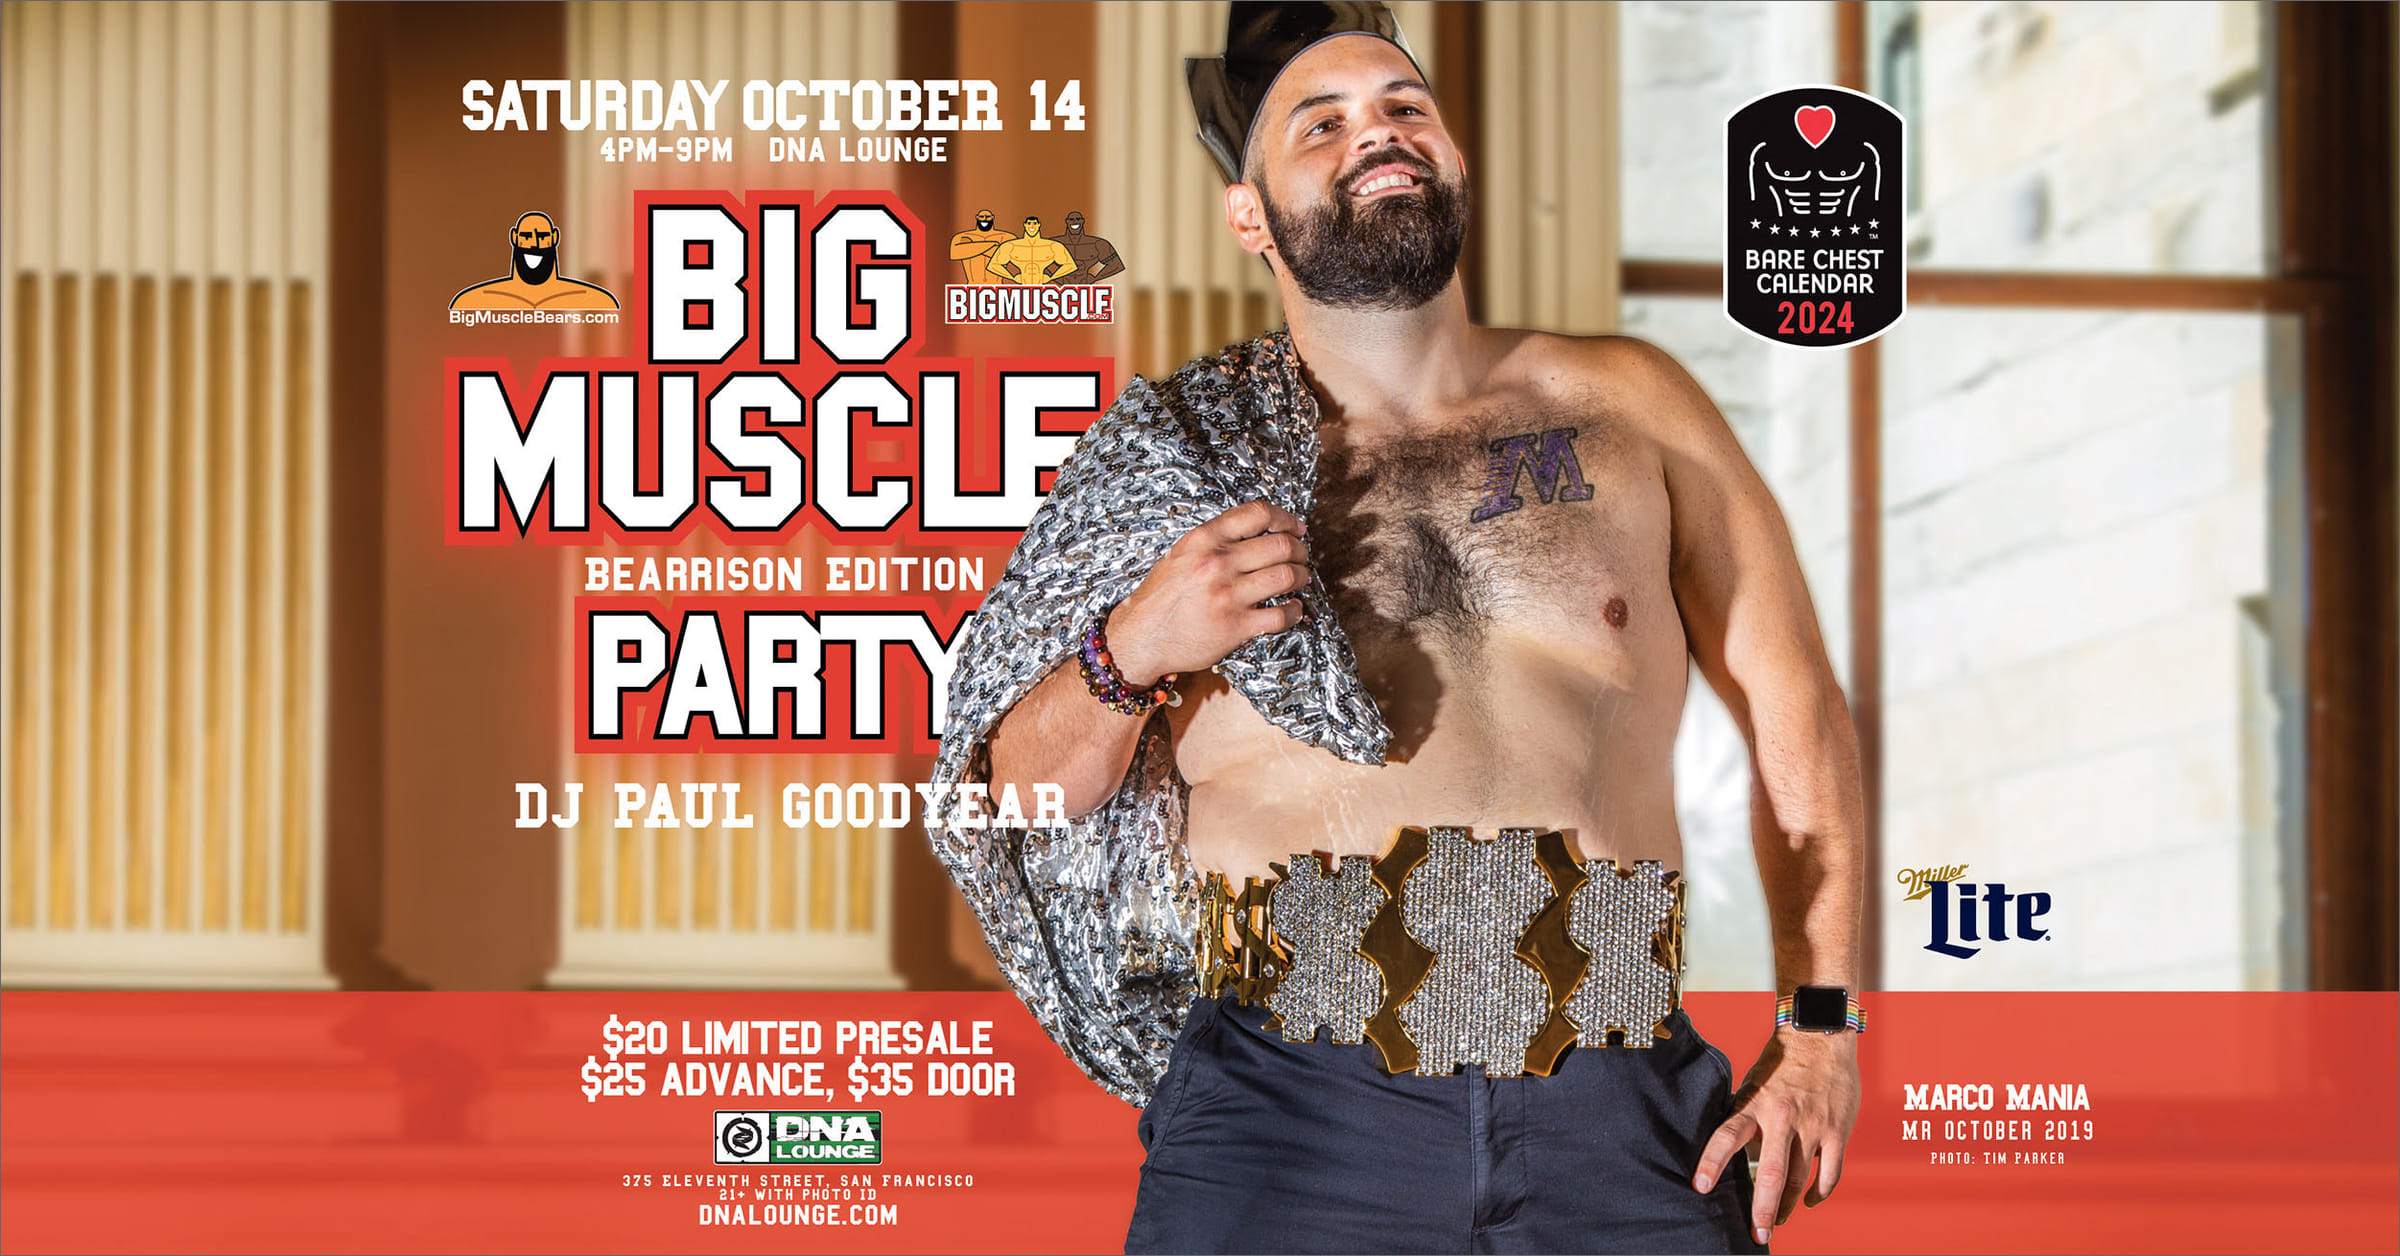 BIG MUSCLE PARTY: BEARRISON EDITION - フライヤー表